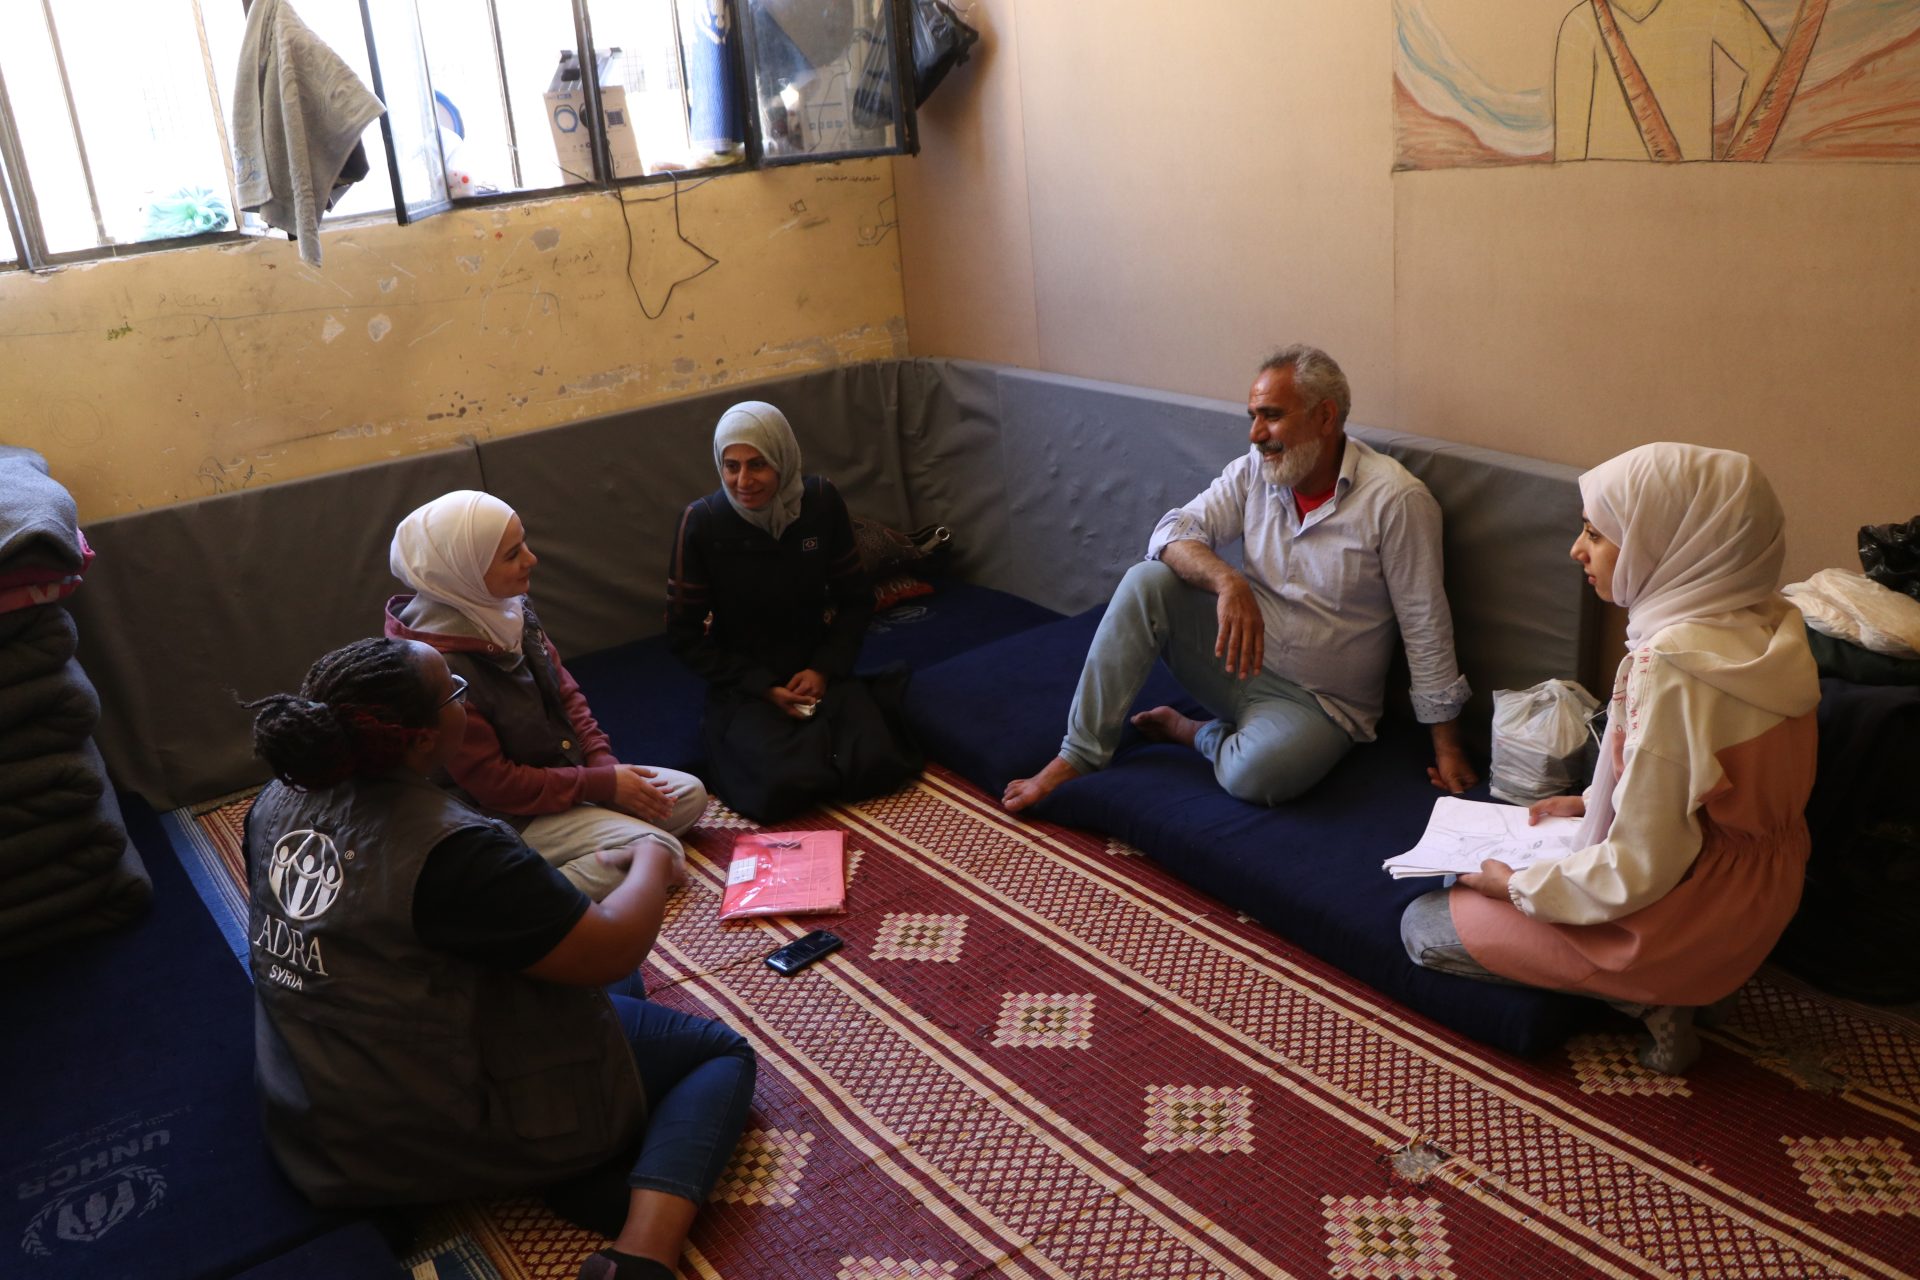 A family receiving support from ADRA after the earthquakes in Syria